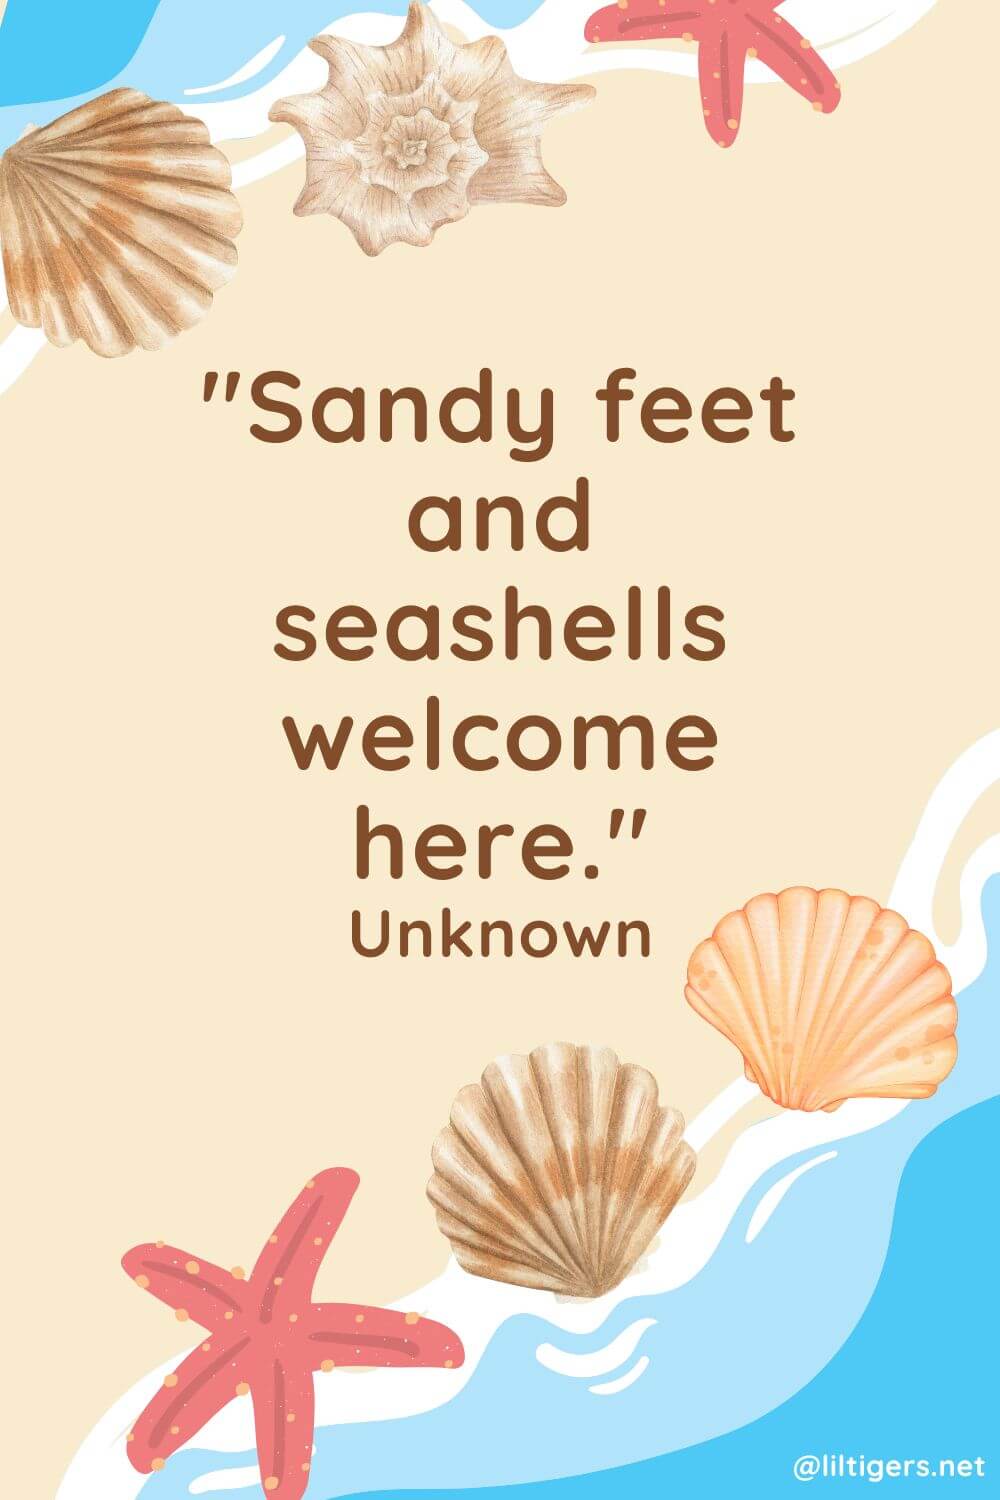 Seashell greetings and wishes